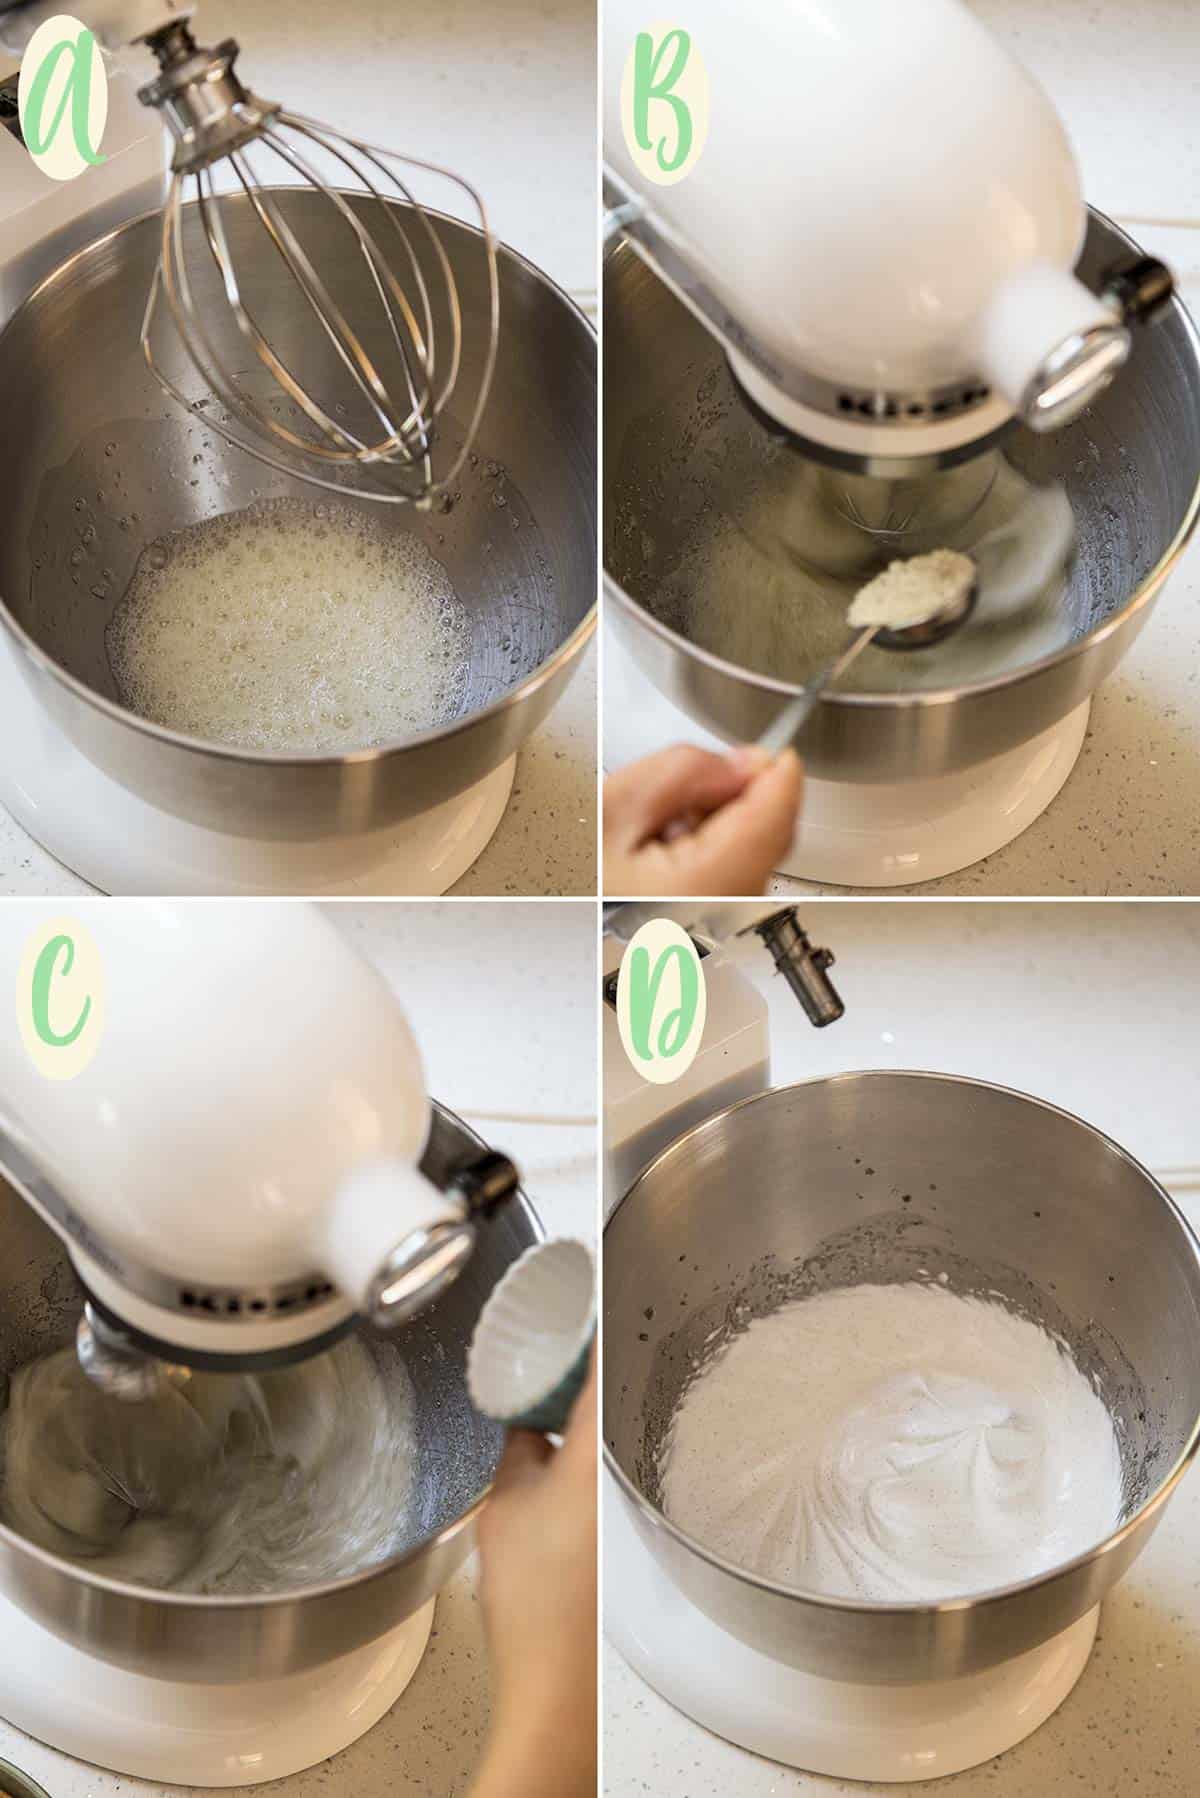 Collage of 4 photos showing how to make meringue buttercream using the French Meringue method